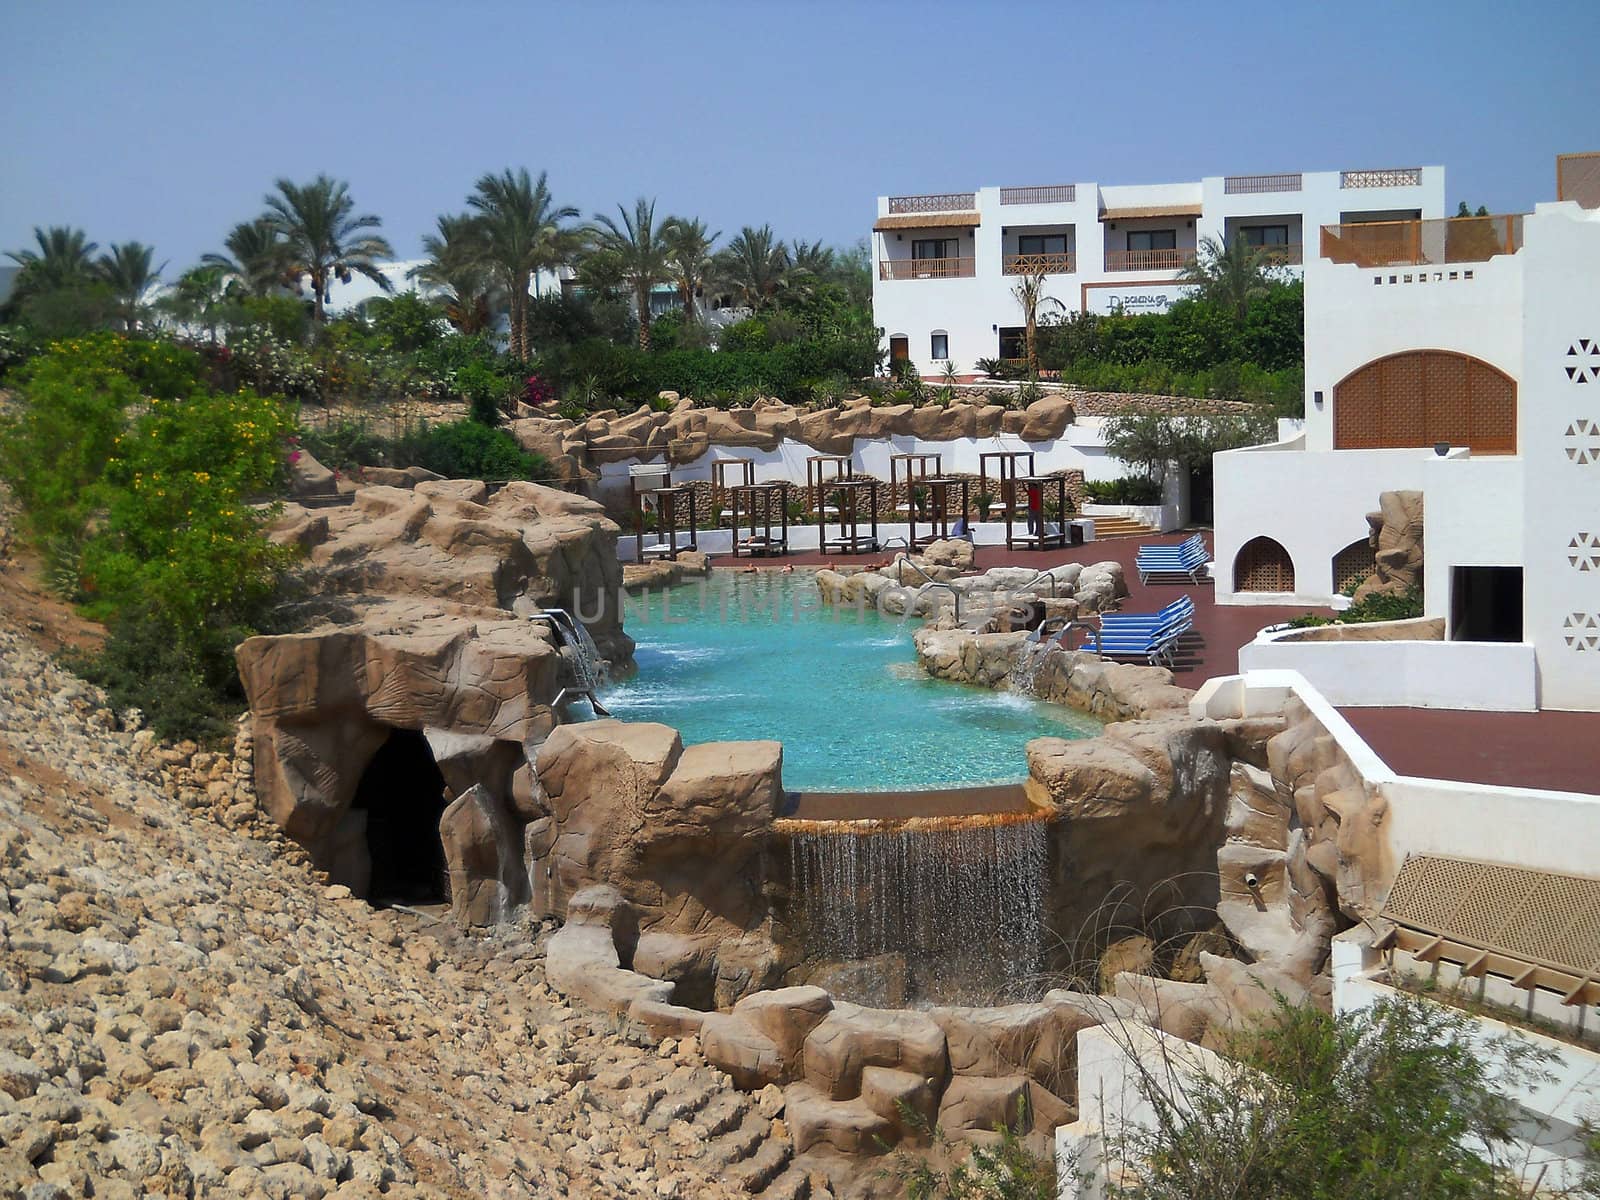 Hotel landscape, rest on the Red sea, Egypt, summer